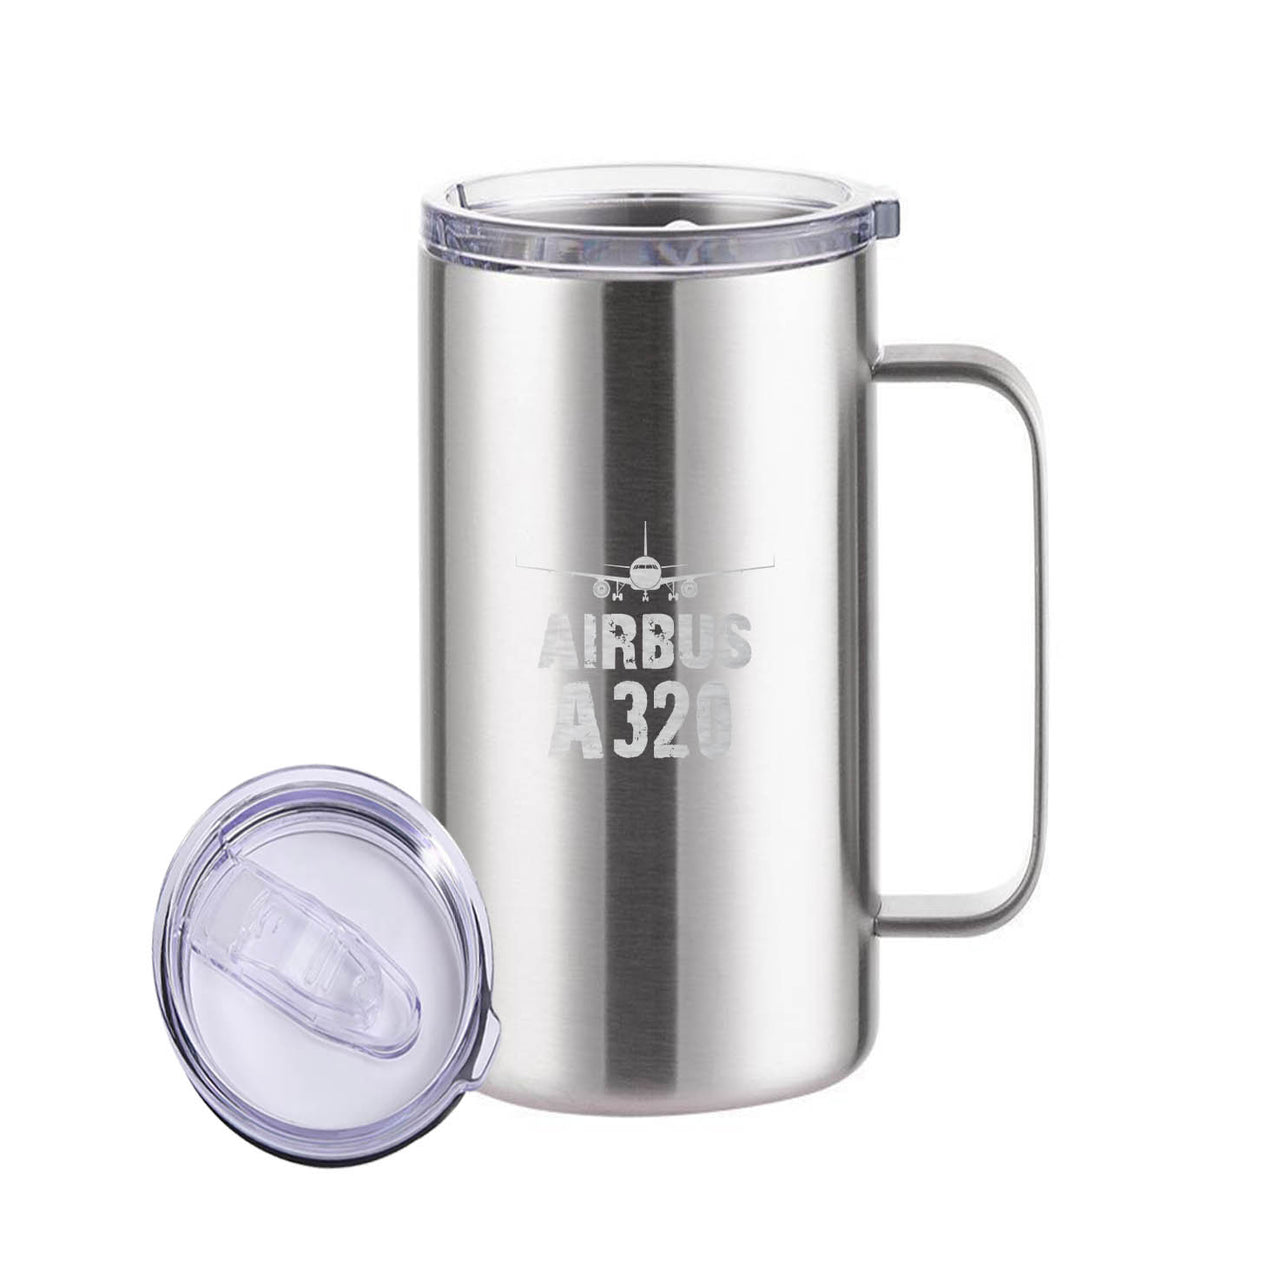 Airbus A320 & Plane Designed Stainless Steel Beer Mugs